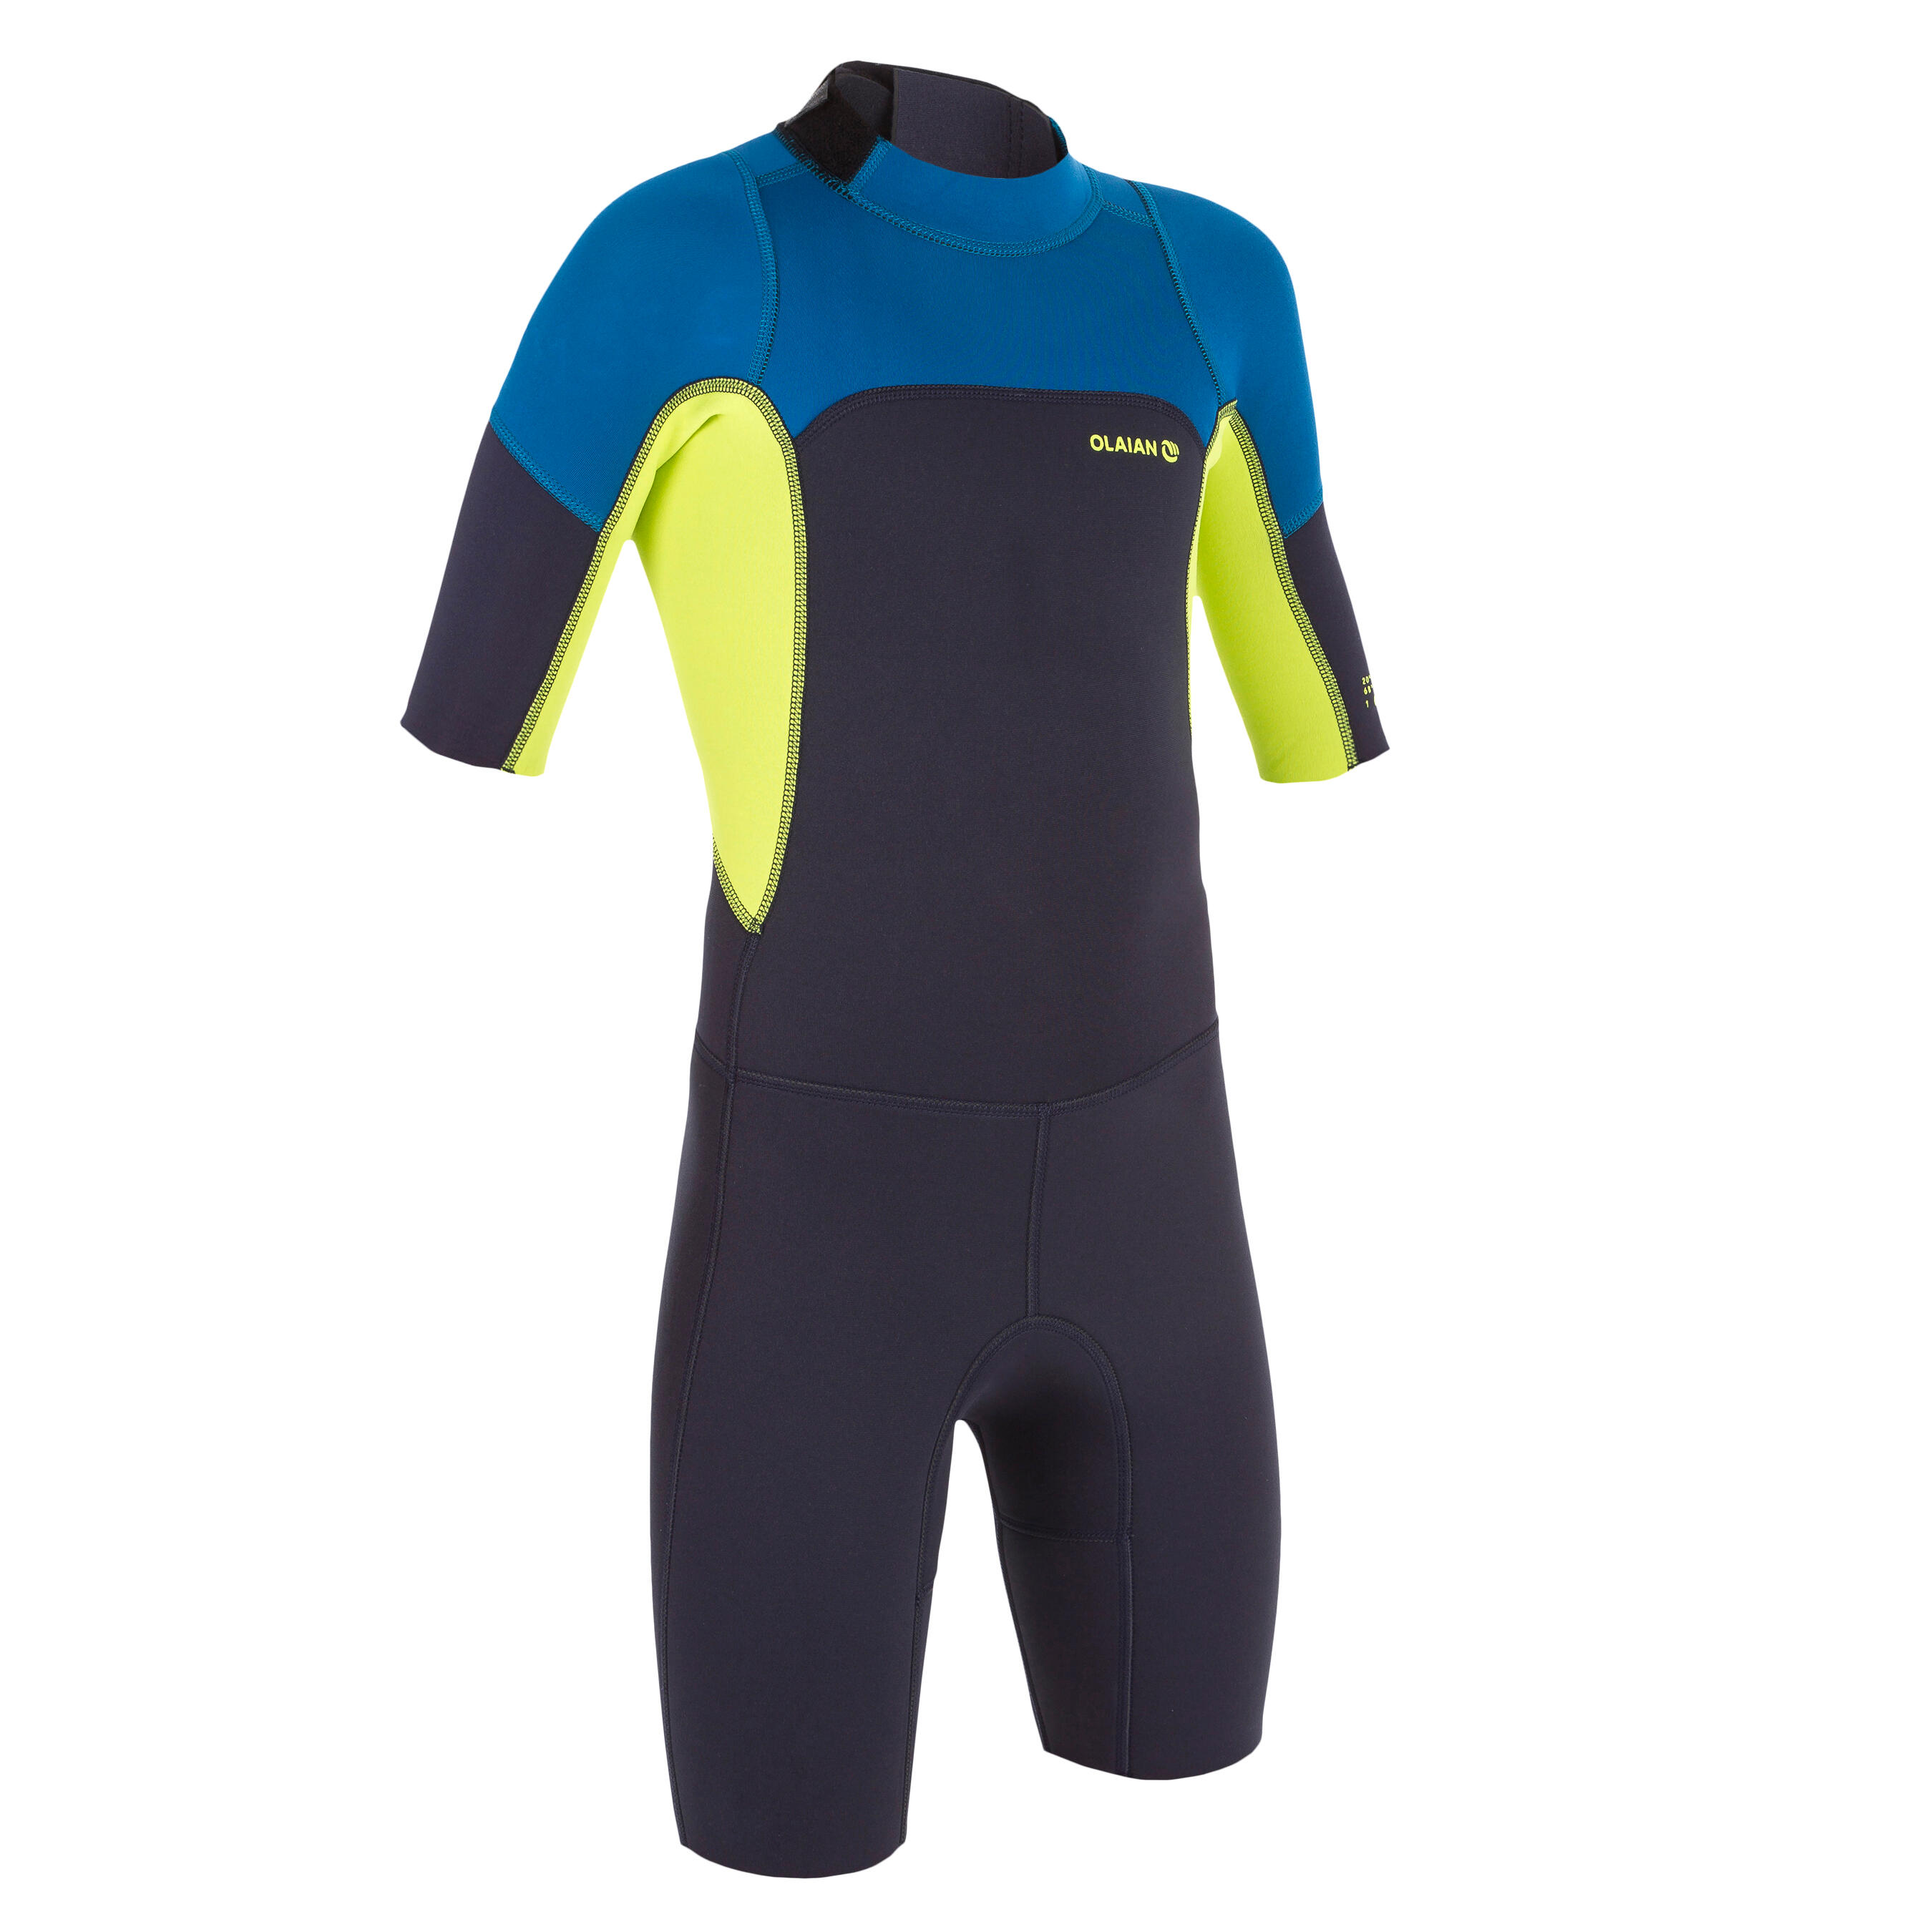 500 child's 2mm stretch neoprene navy blue yellow Shorty Surfing wetsuit 1/5